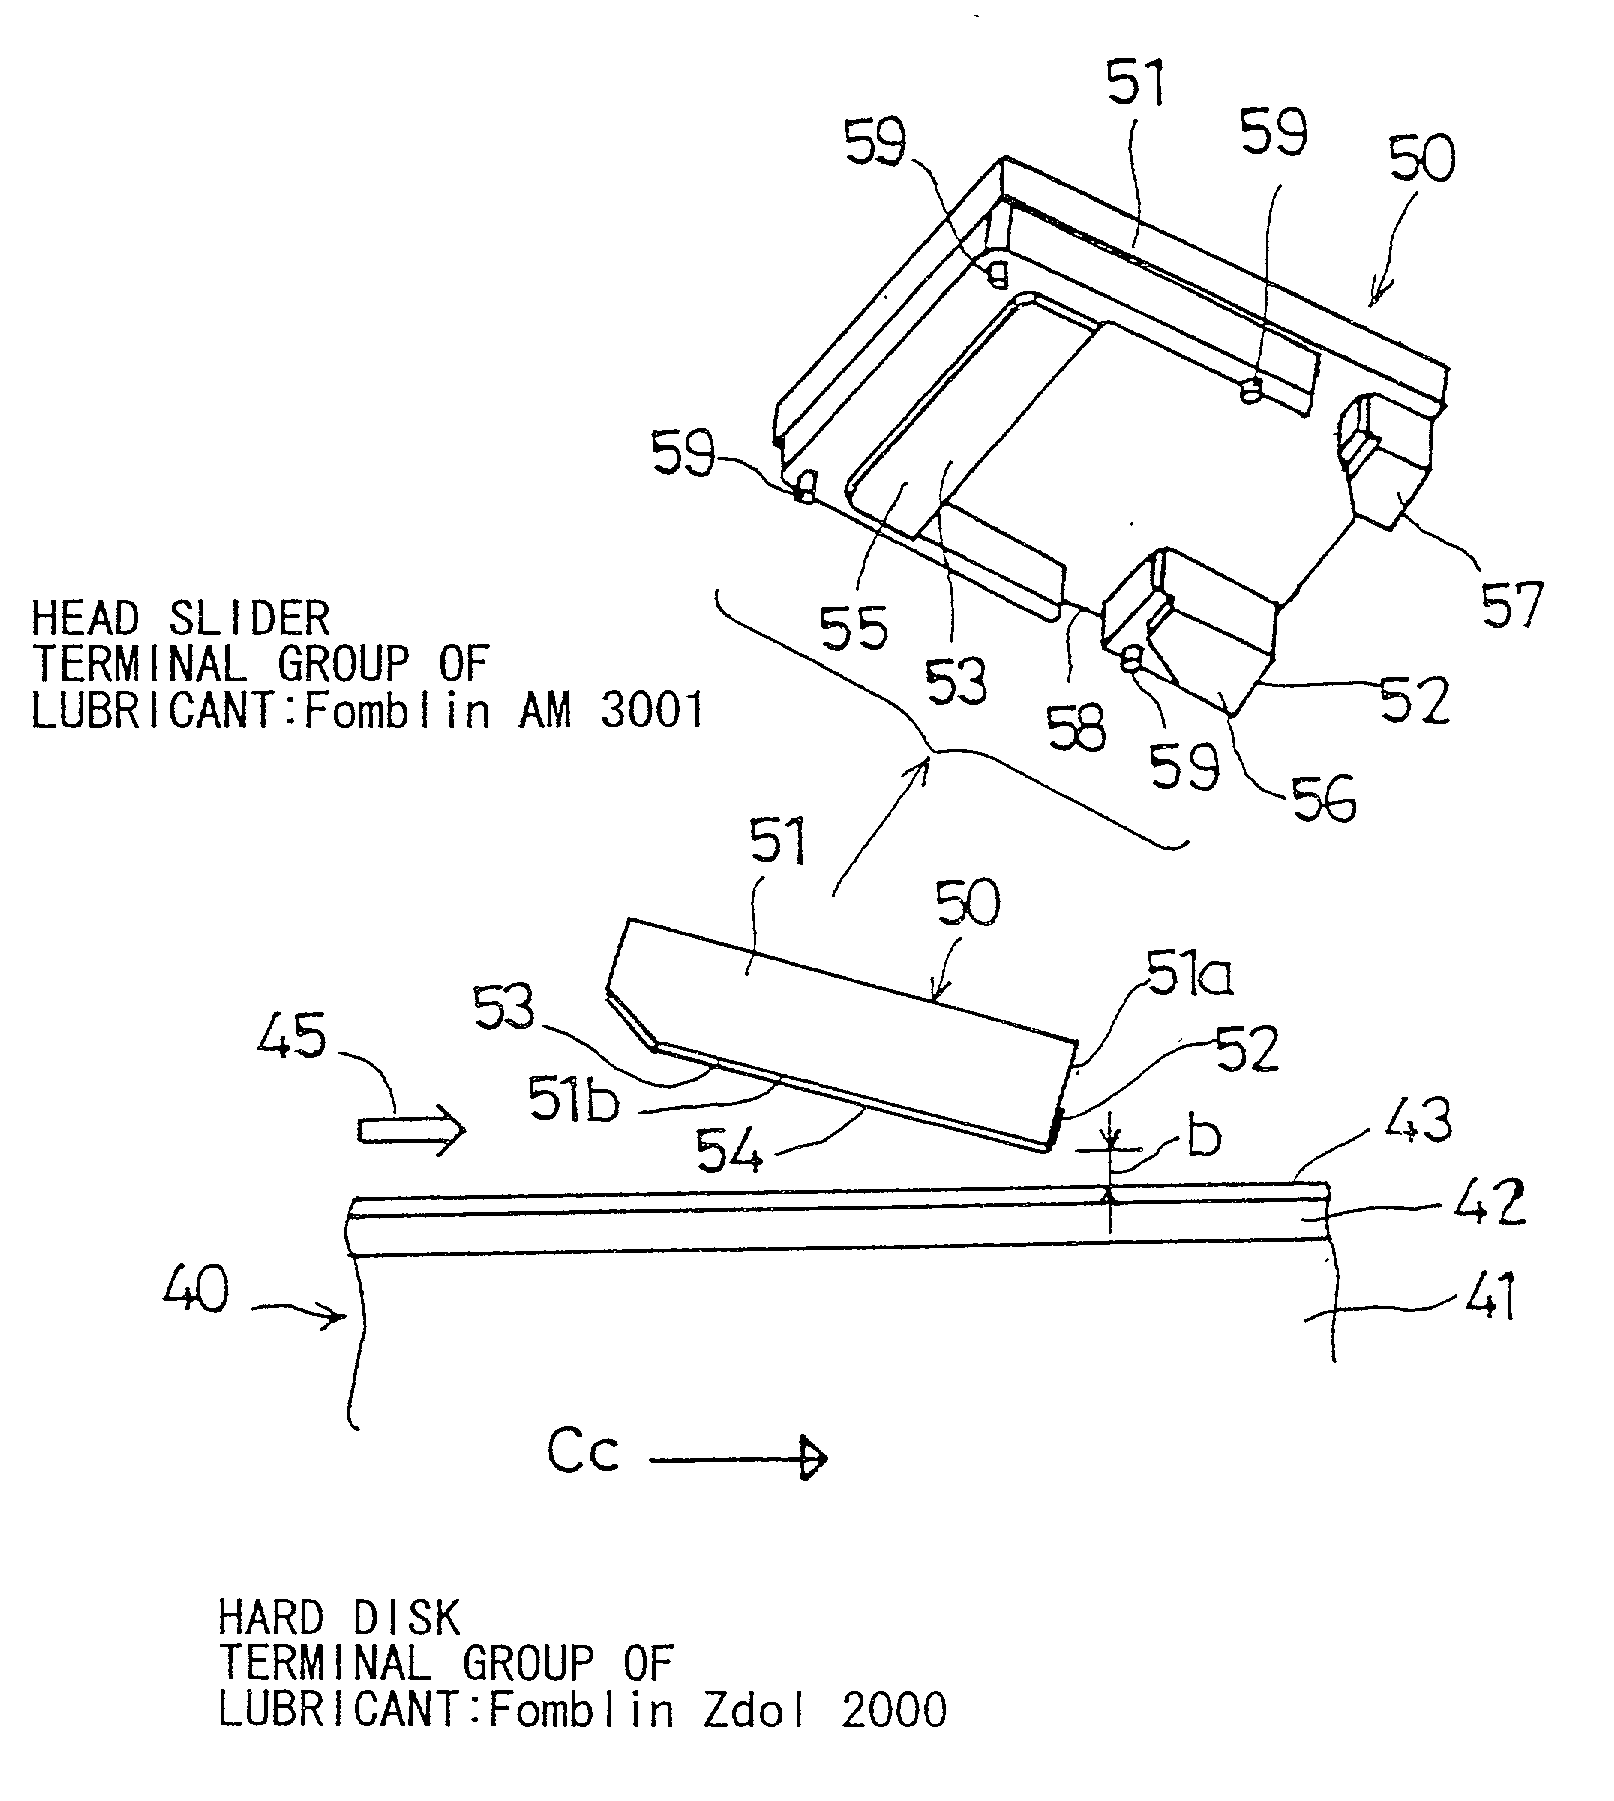 Head slider having a terminal group of lubricant of lubrication layer different from that of a medium